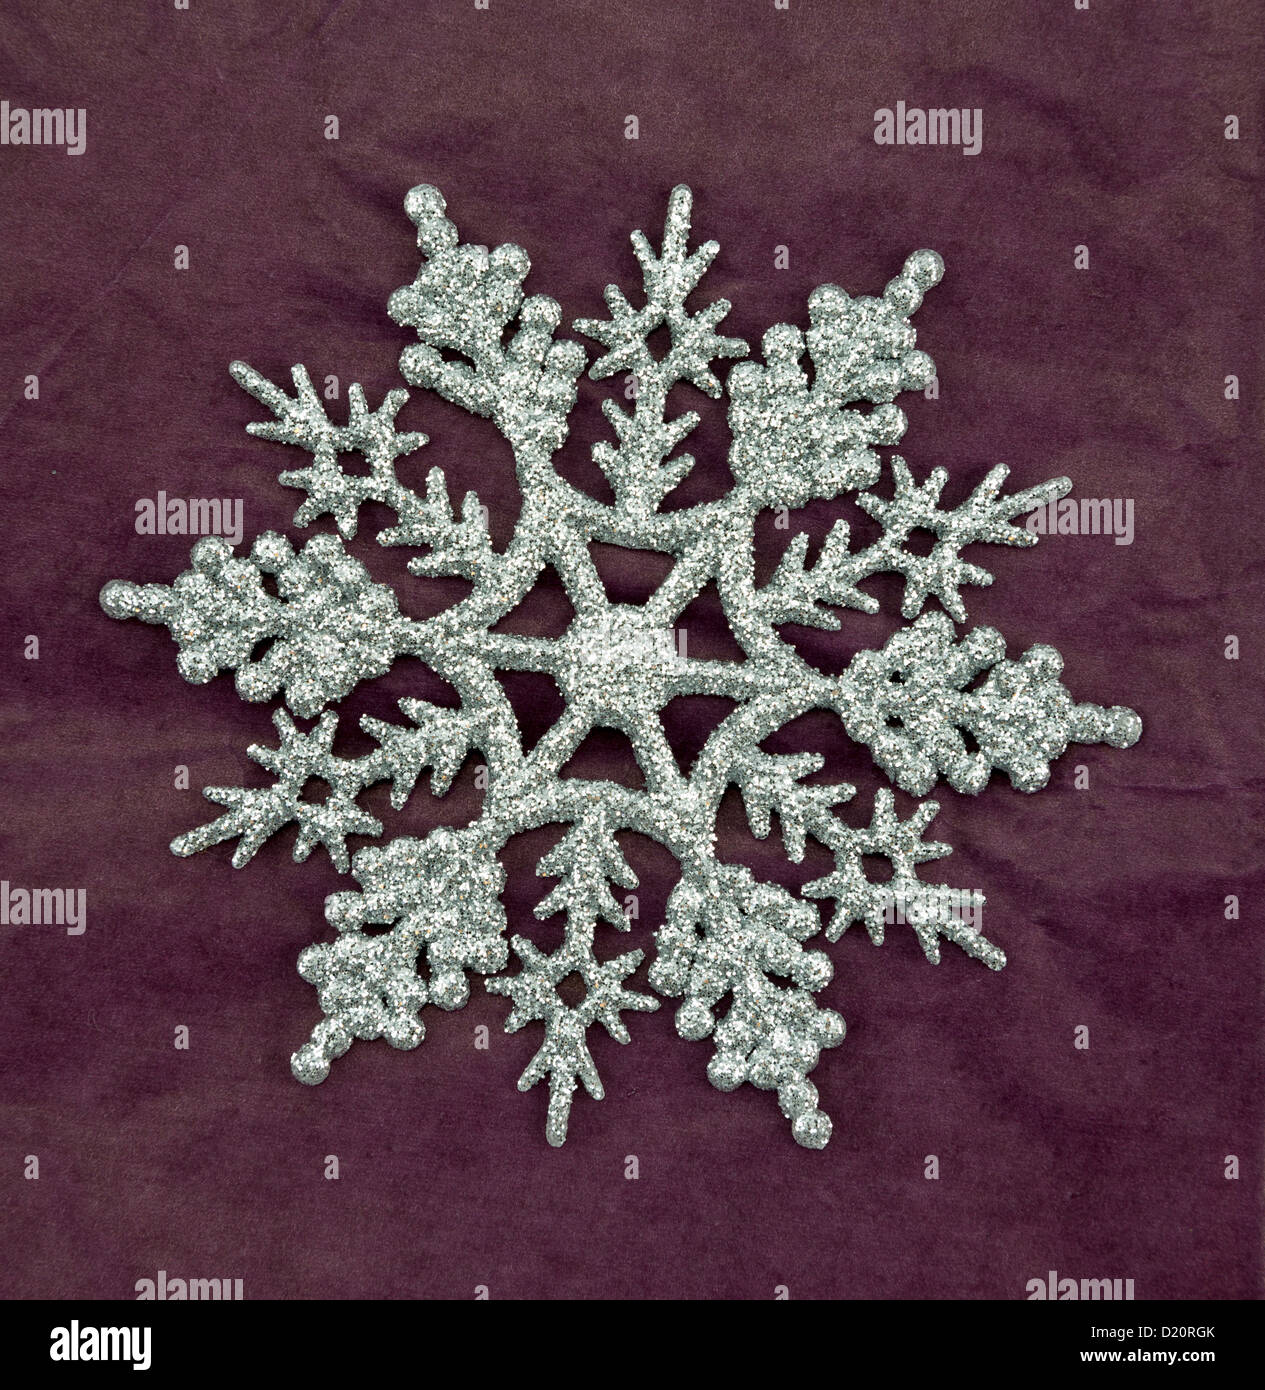 Silver glitter snowflake christmas ornament on a purple background. Stock Photo